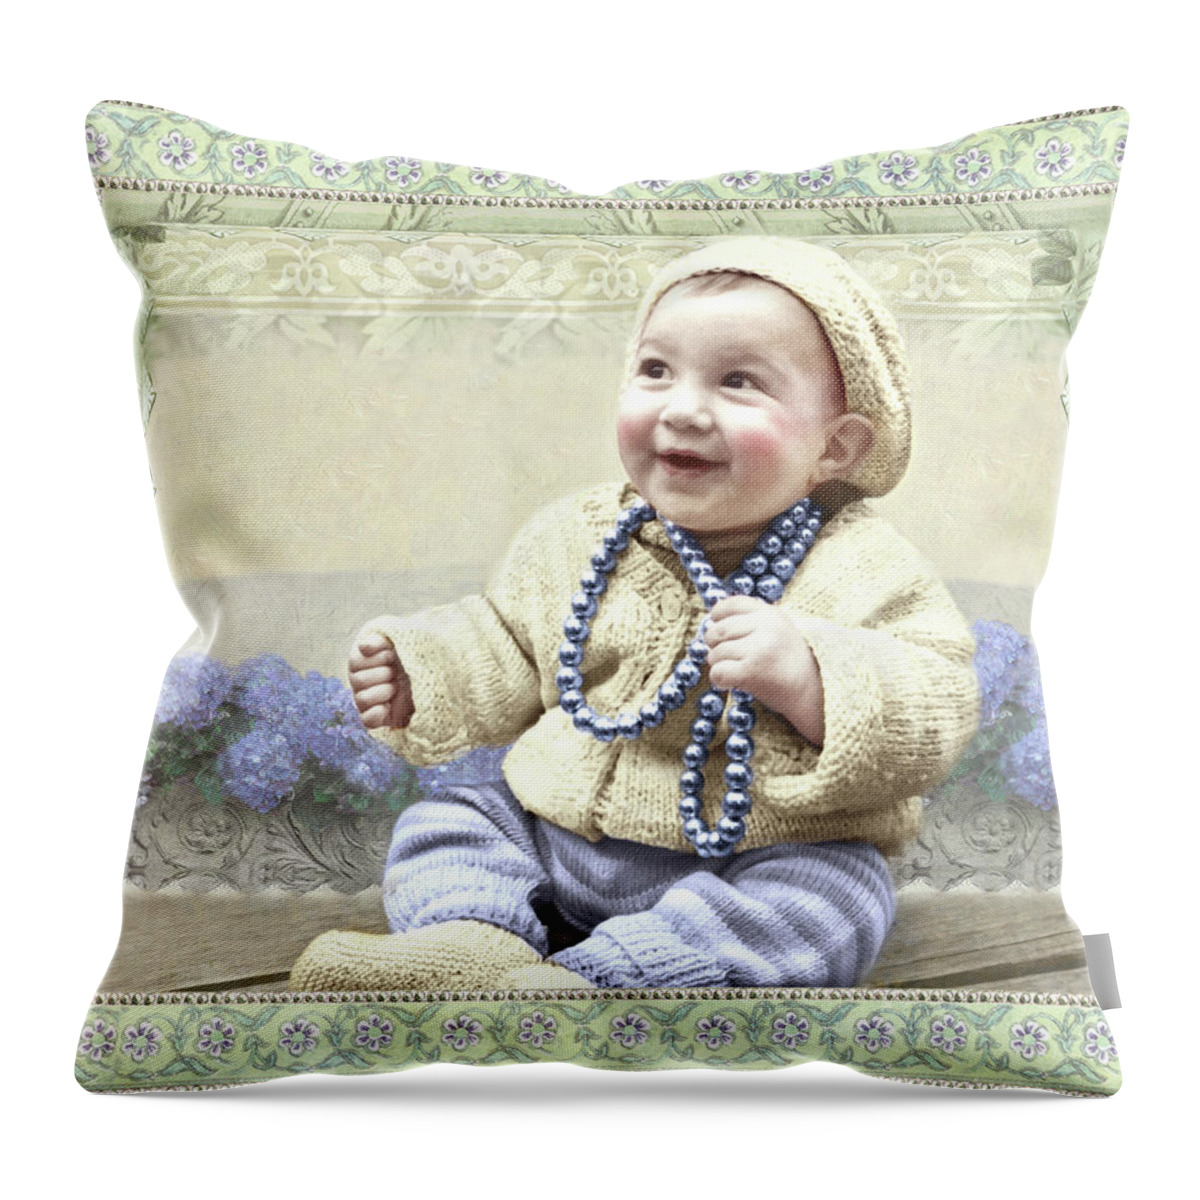  Throw Pillow featuring the photograph Baby Wears Beads by Adele Aron Greenspun